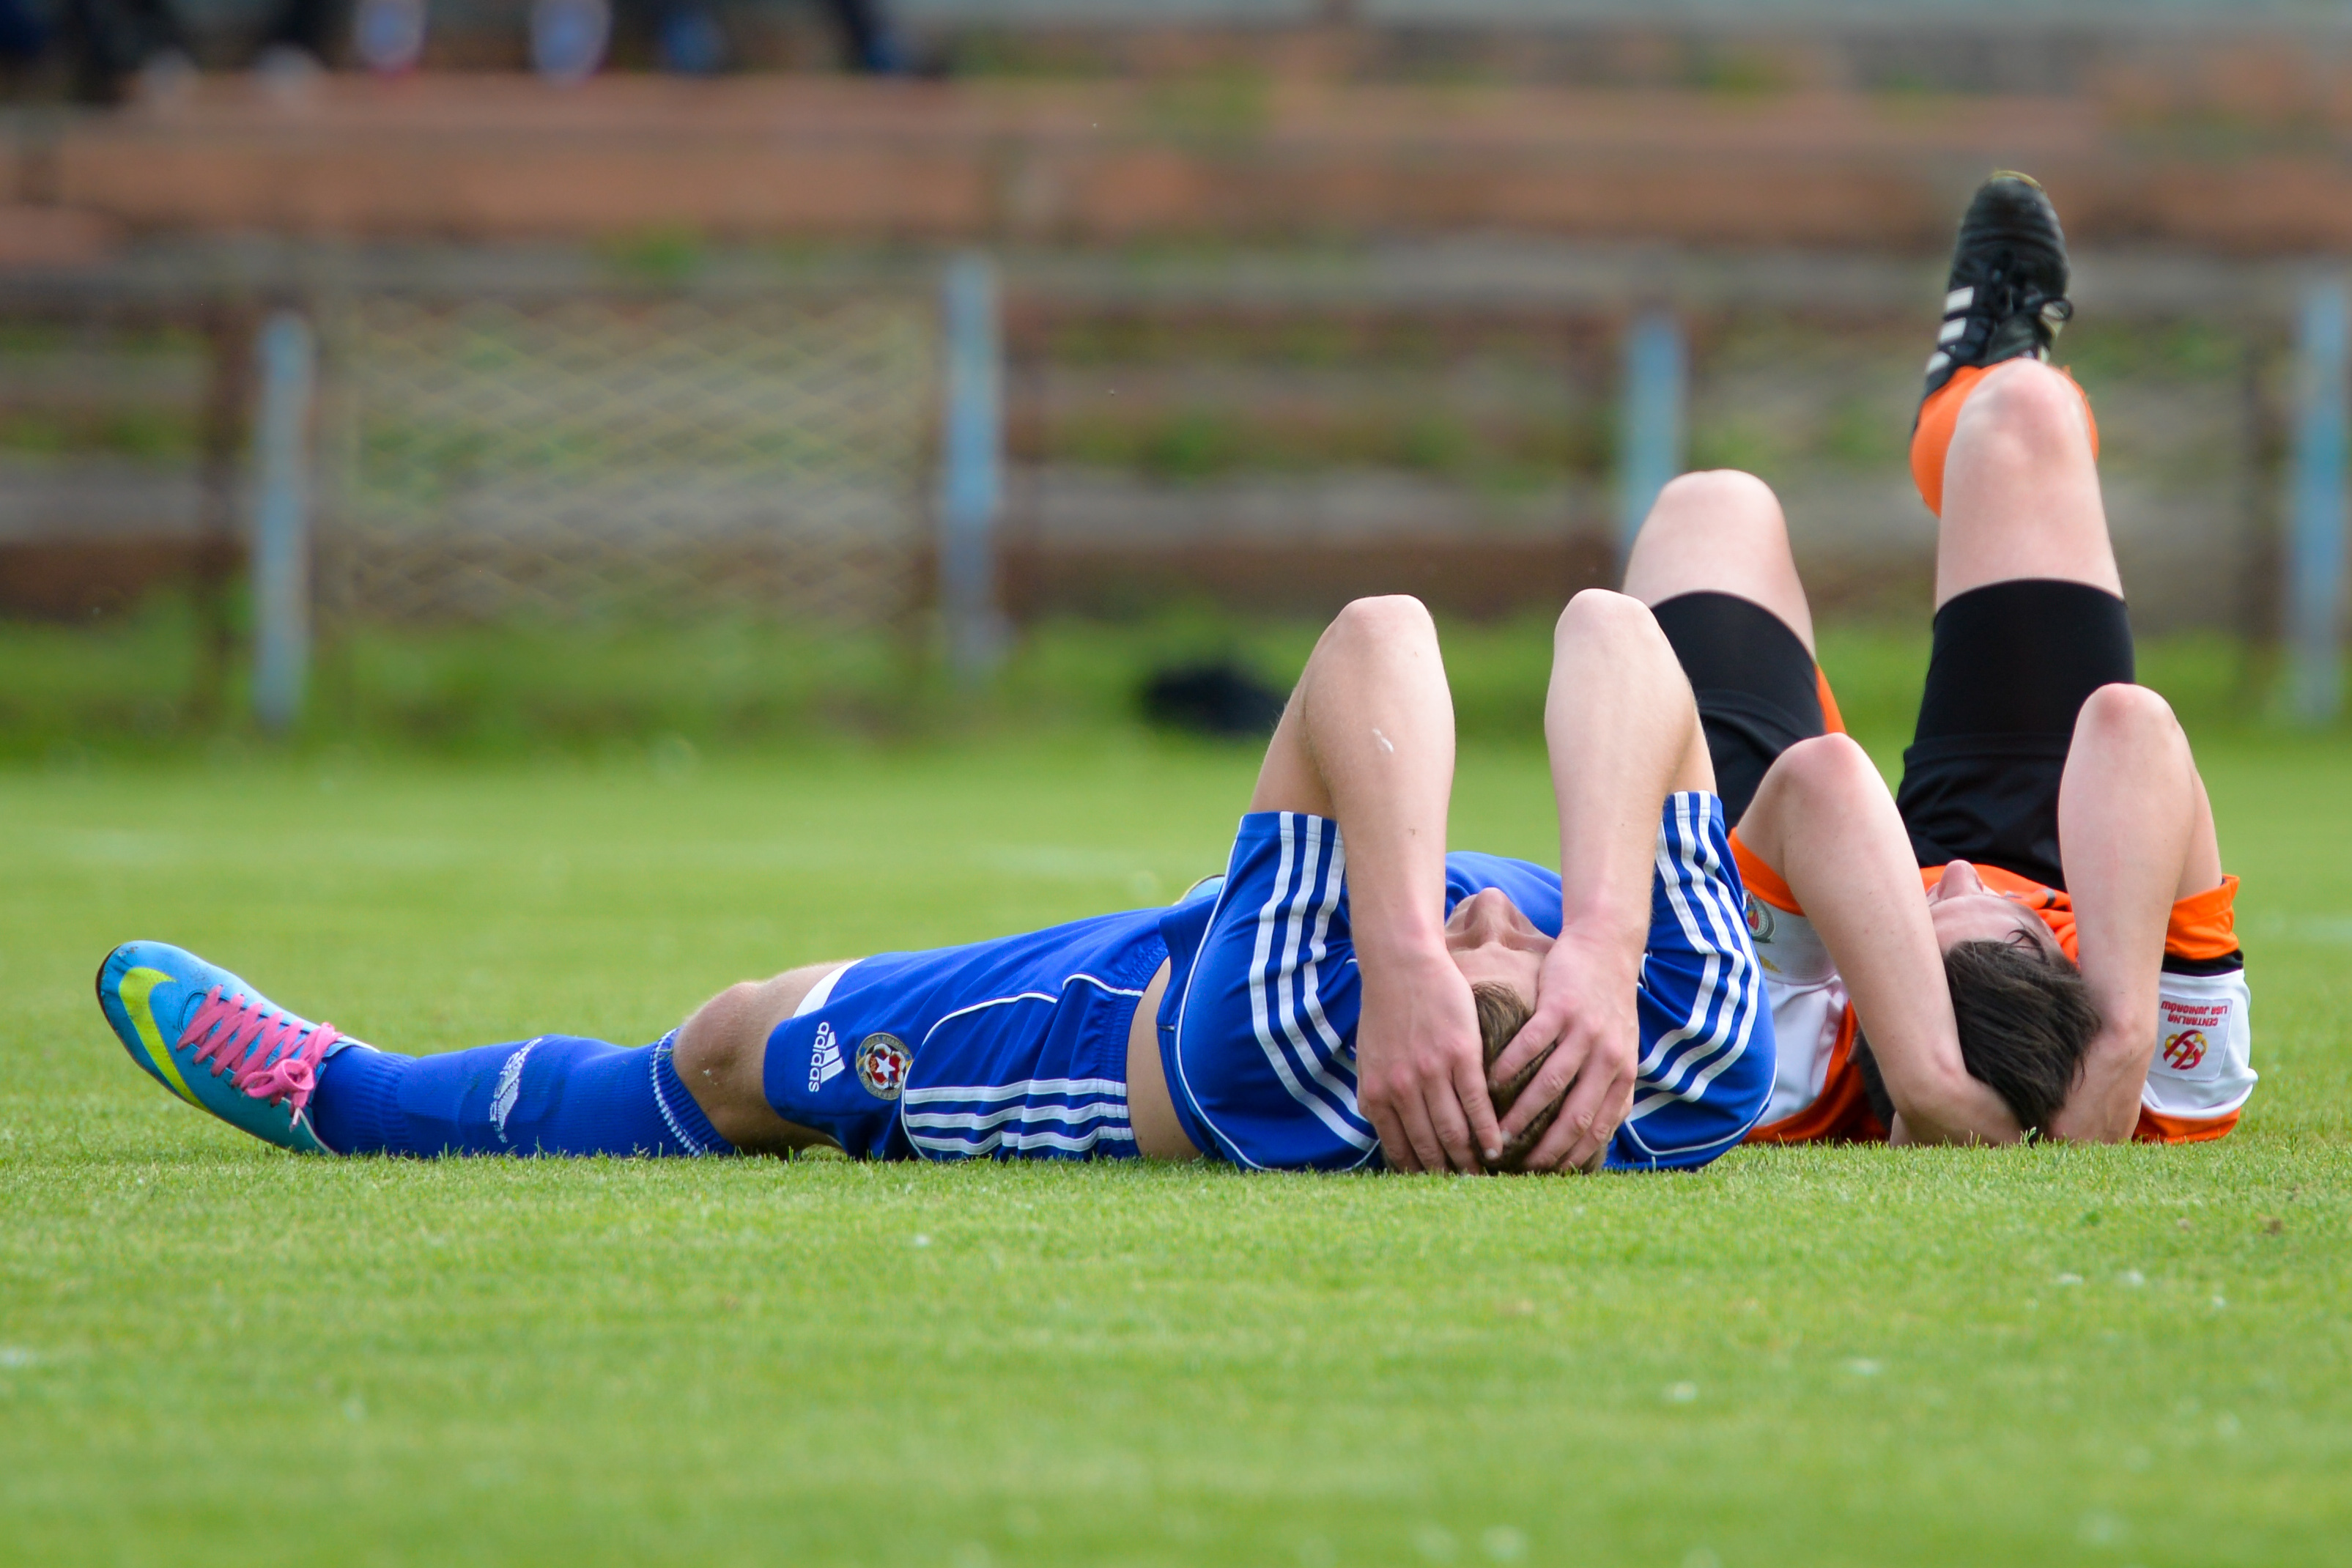 High Performance Sport-Related Concussion Guidelines Released